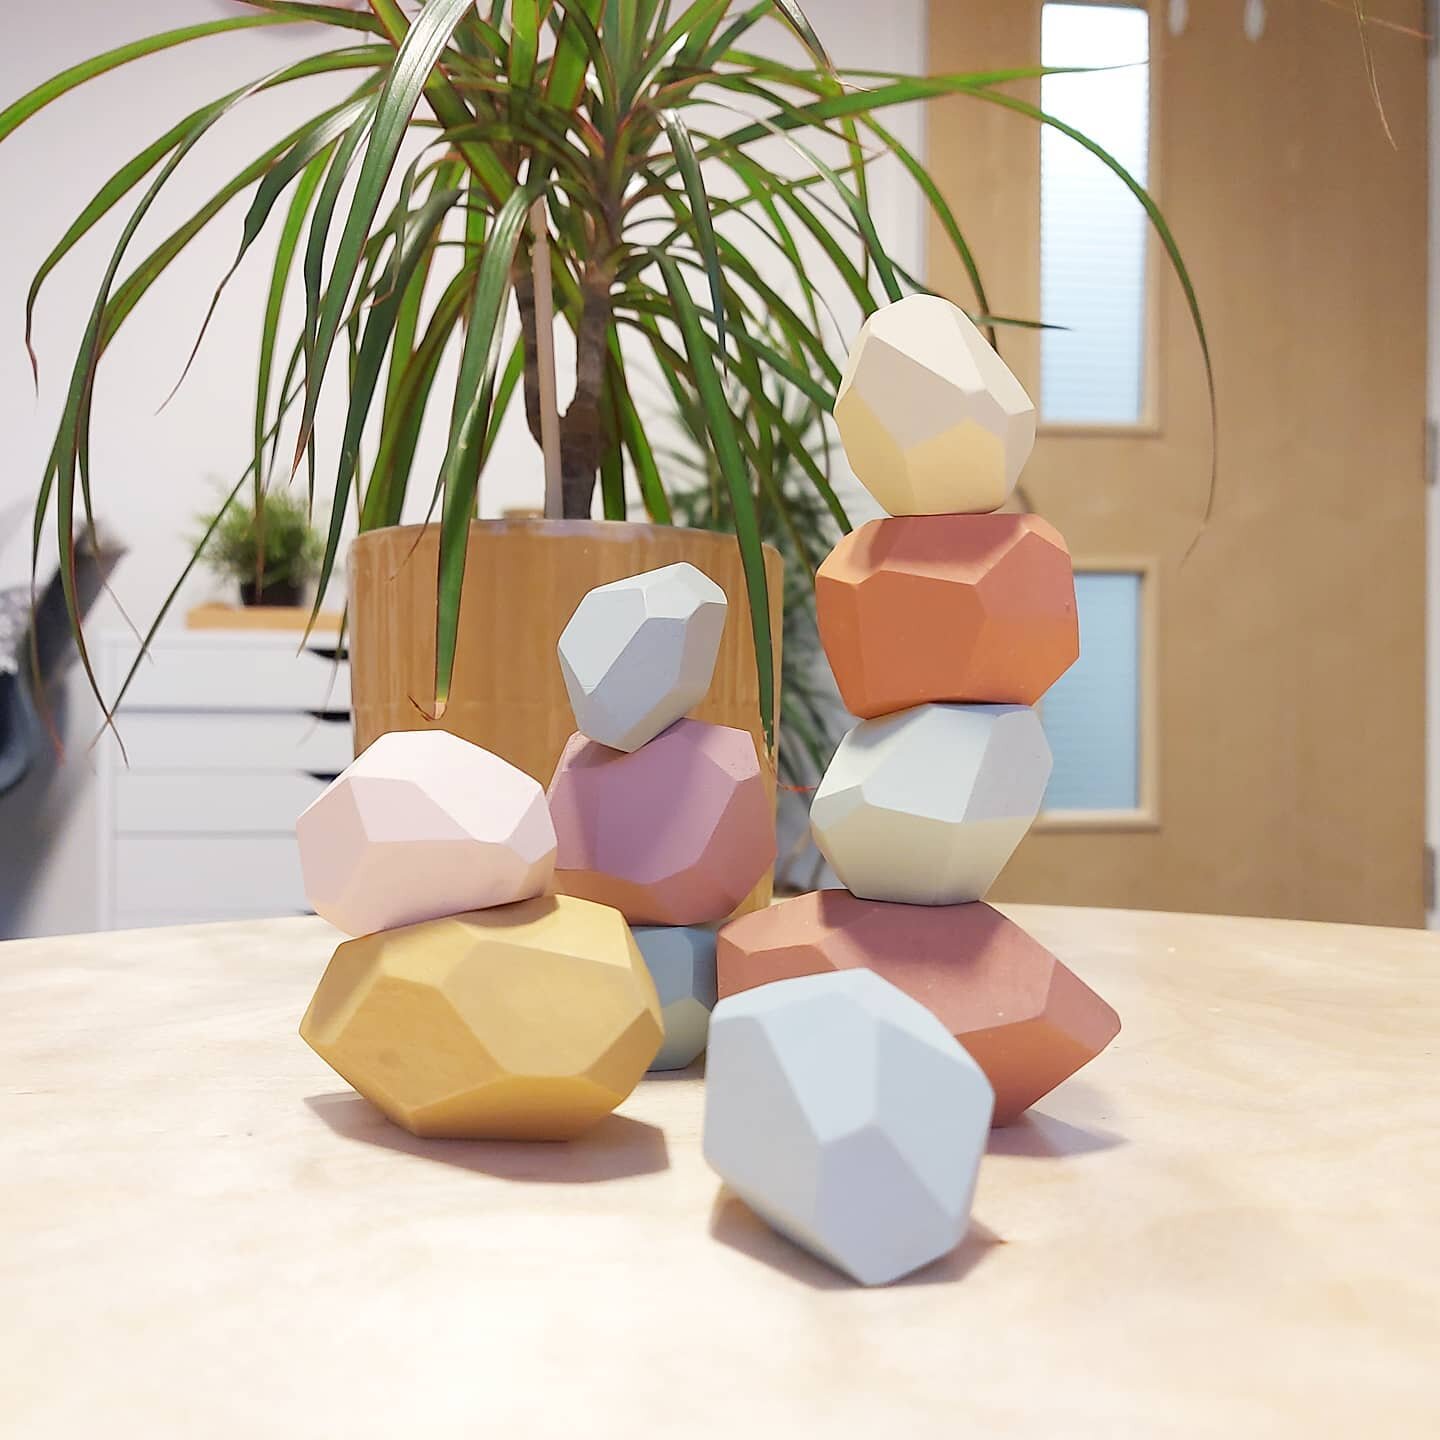 For Christmas I got some beautiful balancing wooden rocks for my little counselling room and I love them! Granted people can't touch them yet because, covid, but they look pretty for now! I have watered my plants and set them up. 

I hope however thi